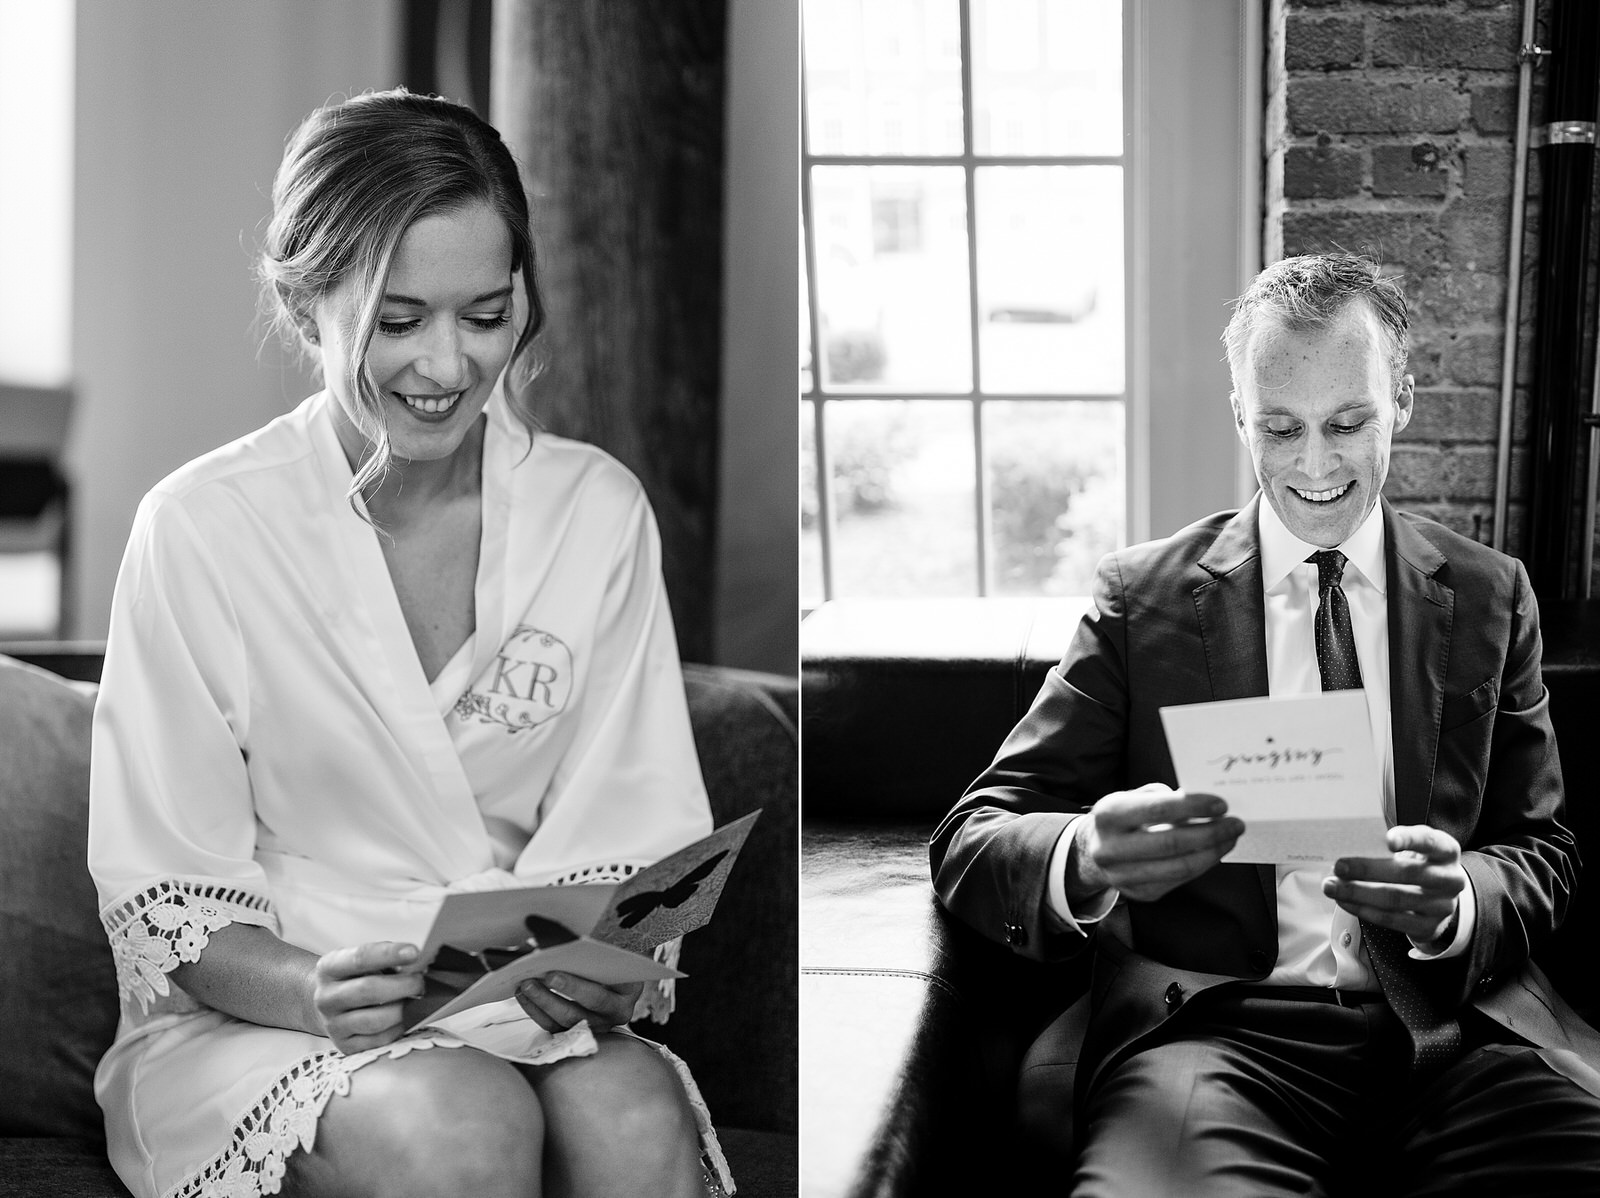 Wedding day ideas: exchange letters with one another before you see each other